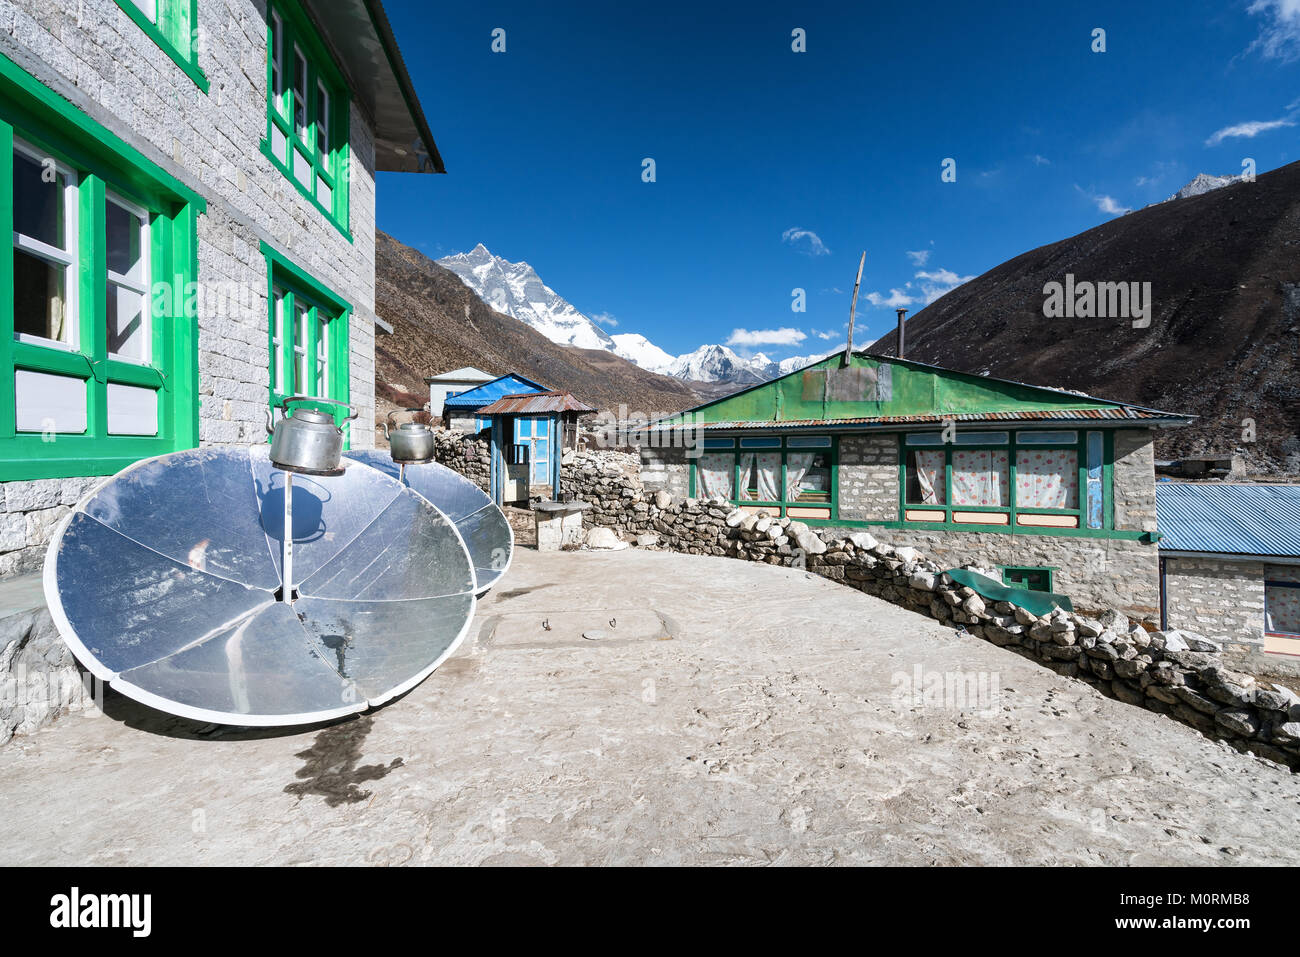 Water heating by solar power in Dingboche, Nepal Stock Photo